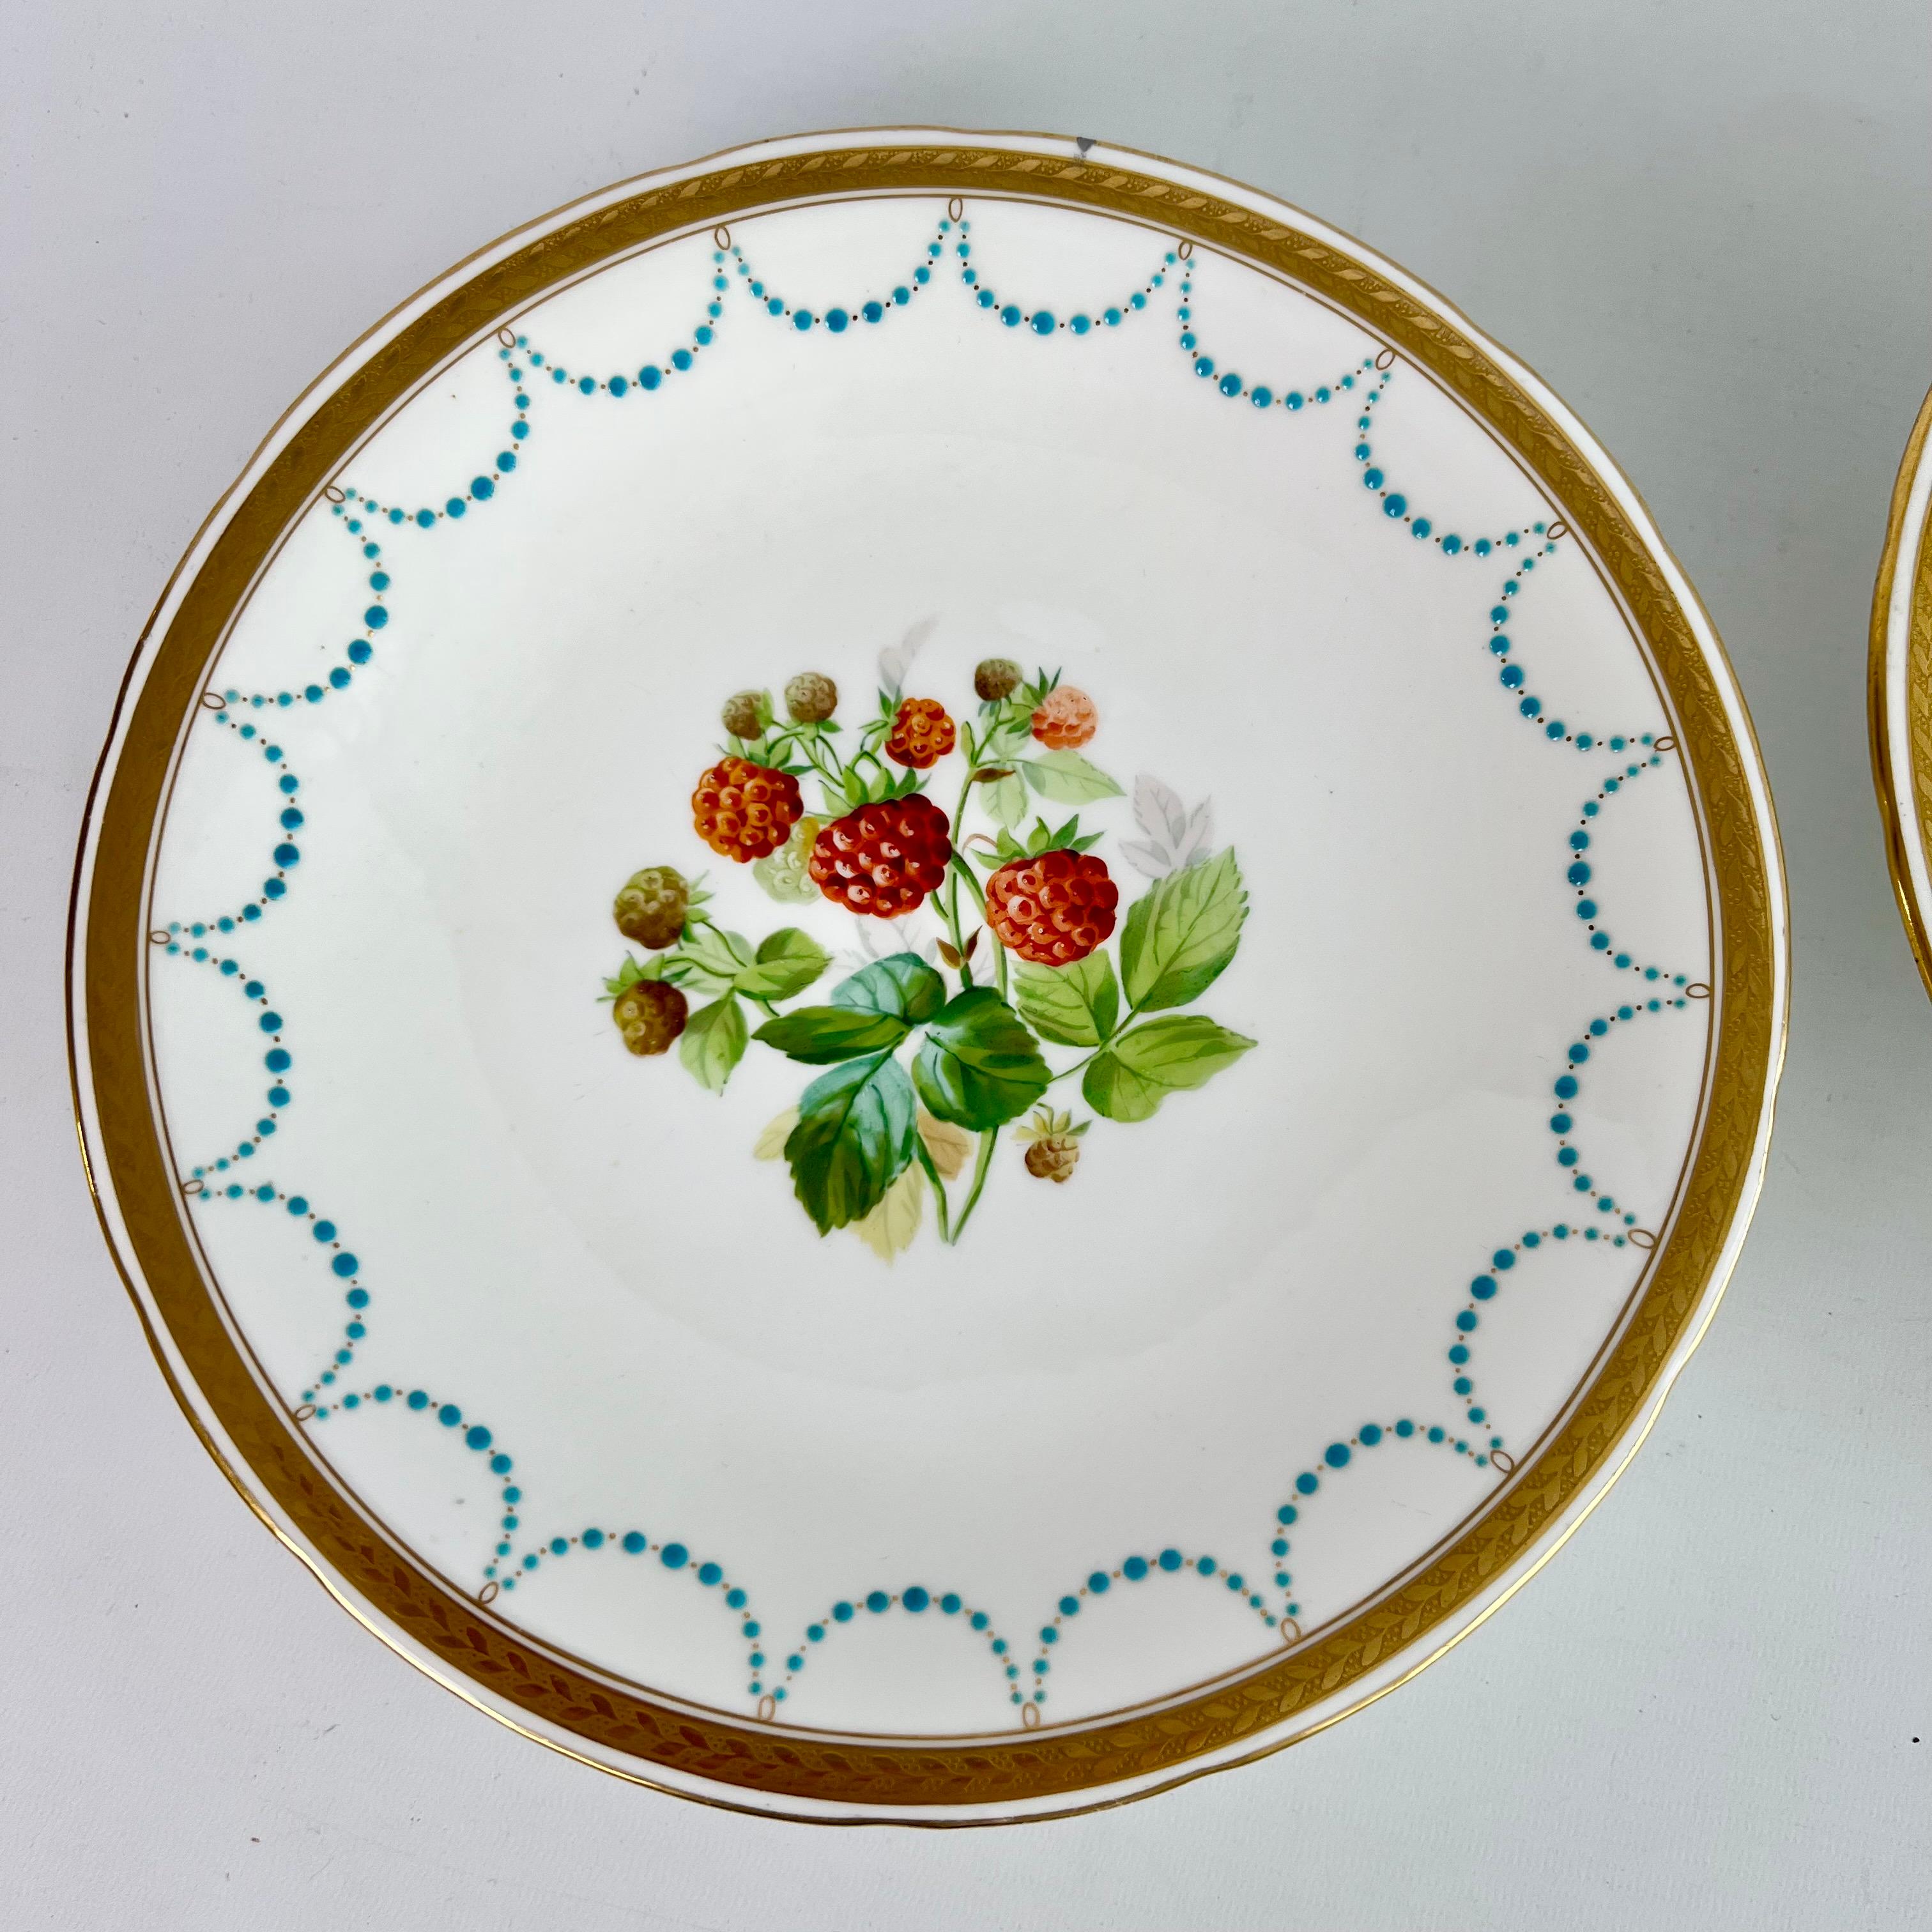 Minton Porcelain Dessert Service, Turquoise and Gilt, Flowers and Fruits, 1870 9